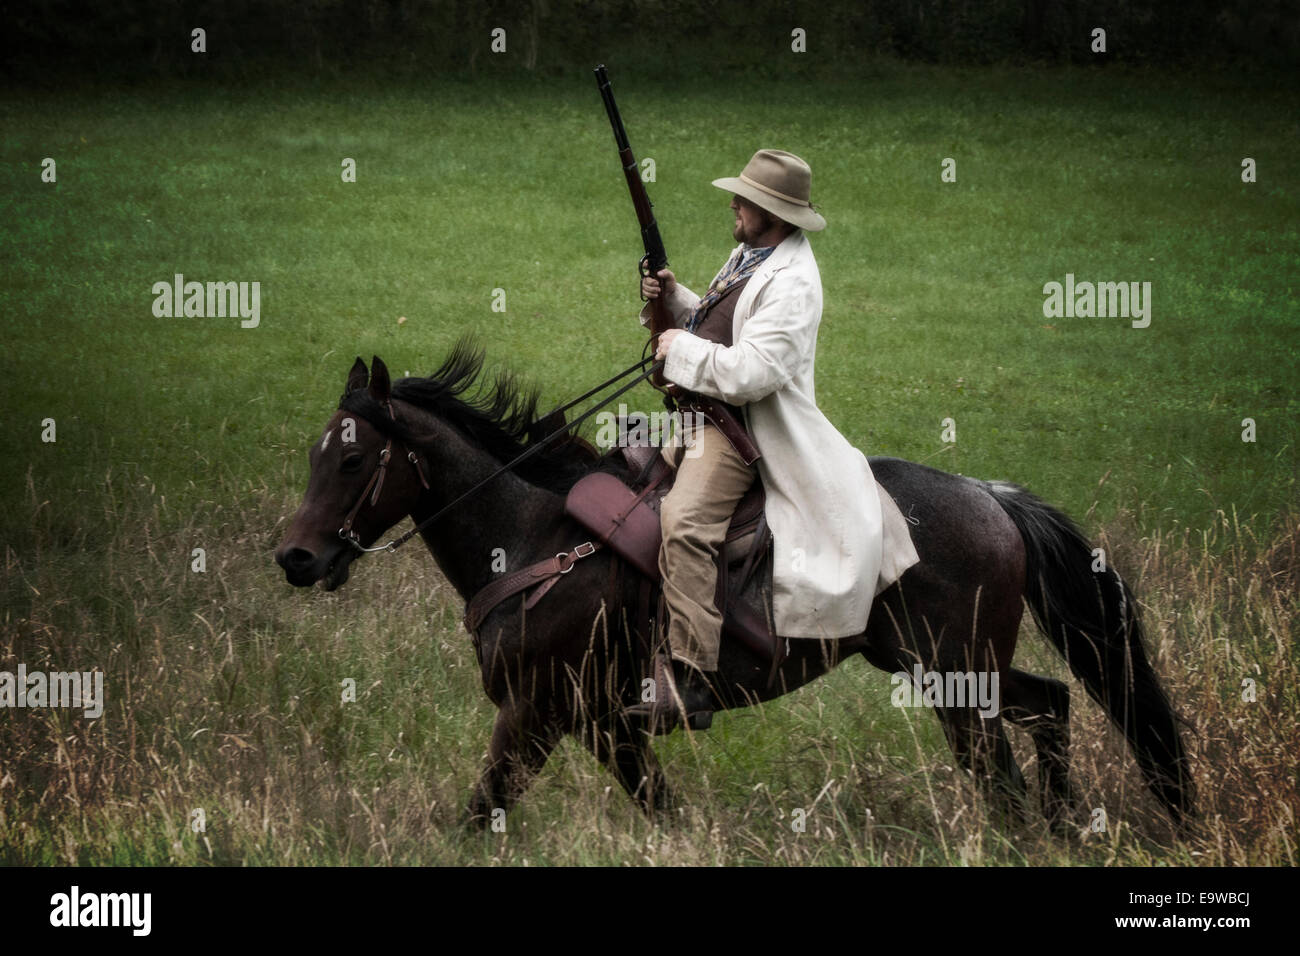 cowboy riding countryside country western old west man male rider horse rifle gun retro vintage past history historical field ho Stock Photo